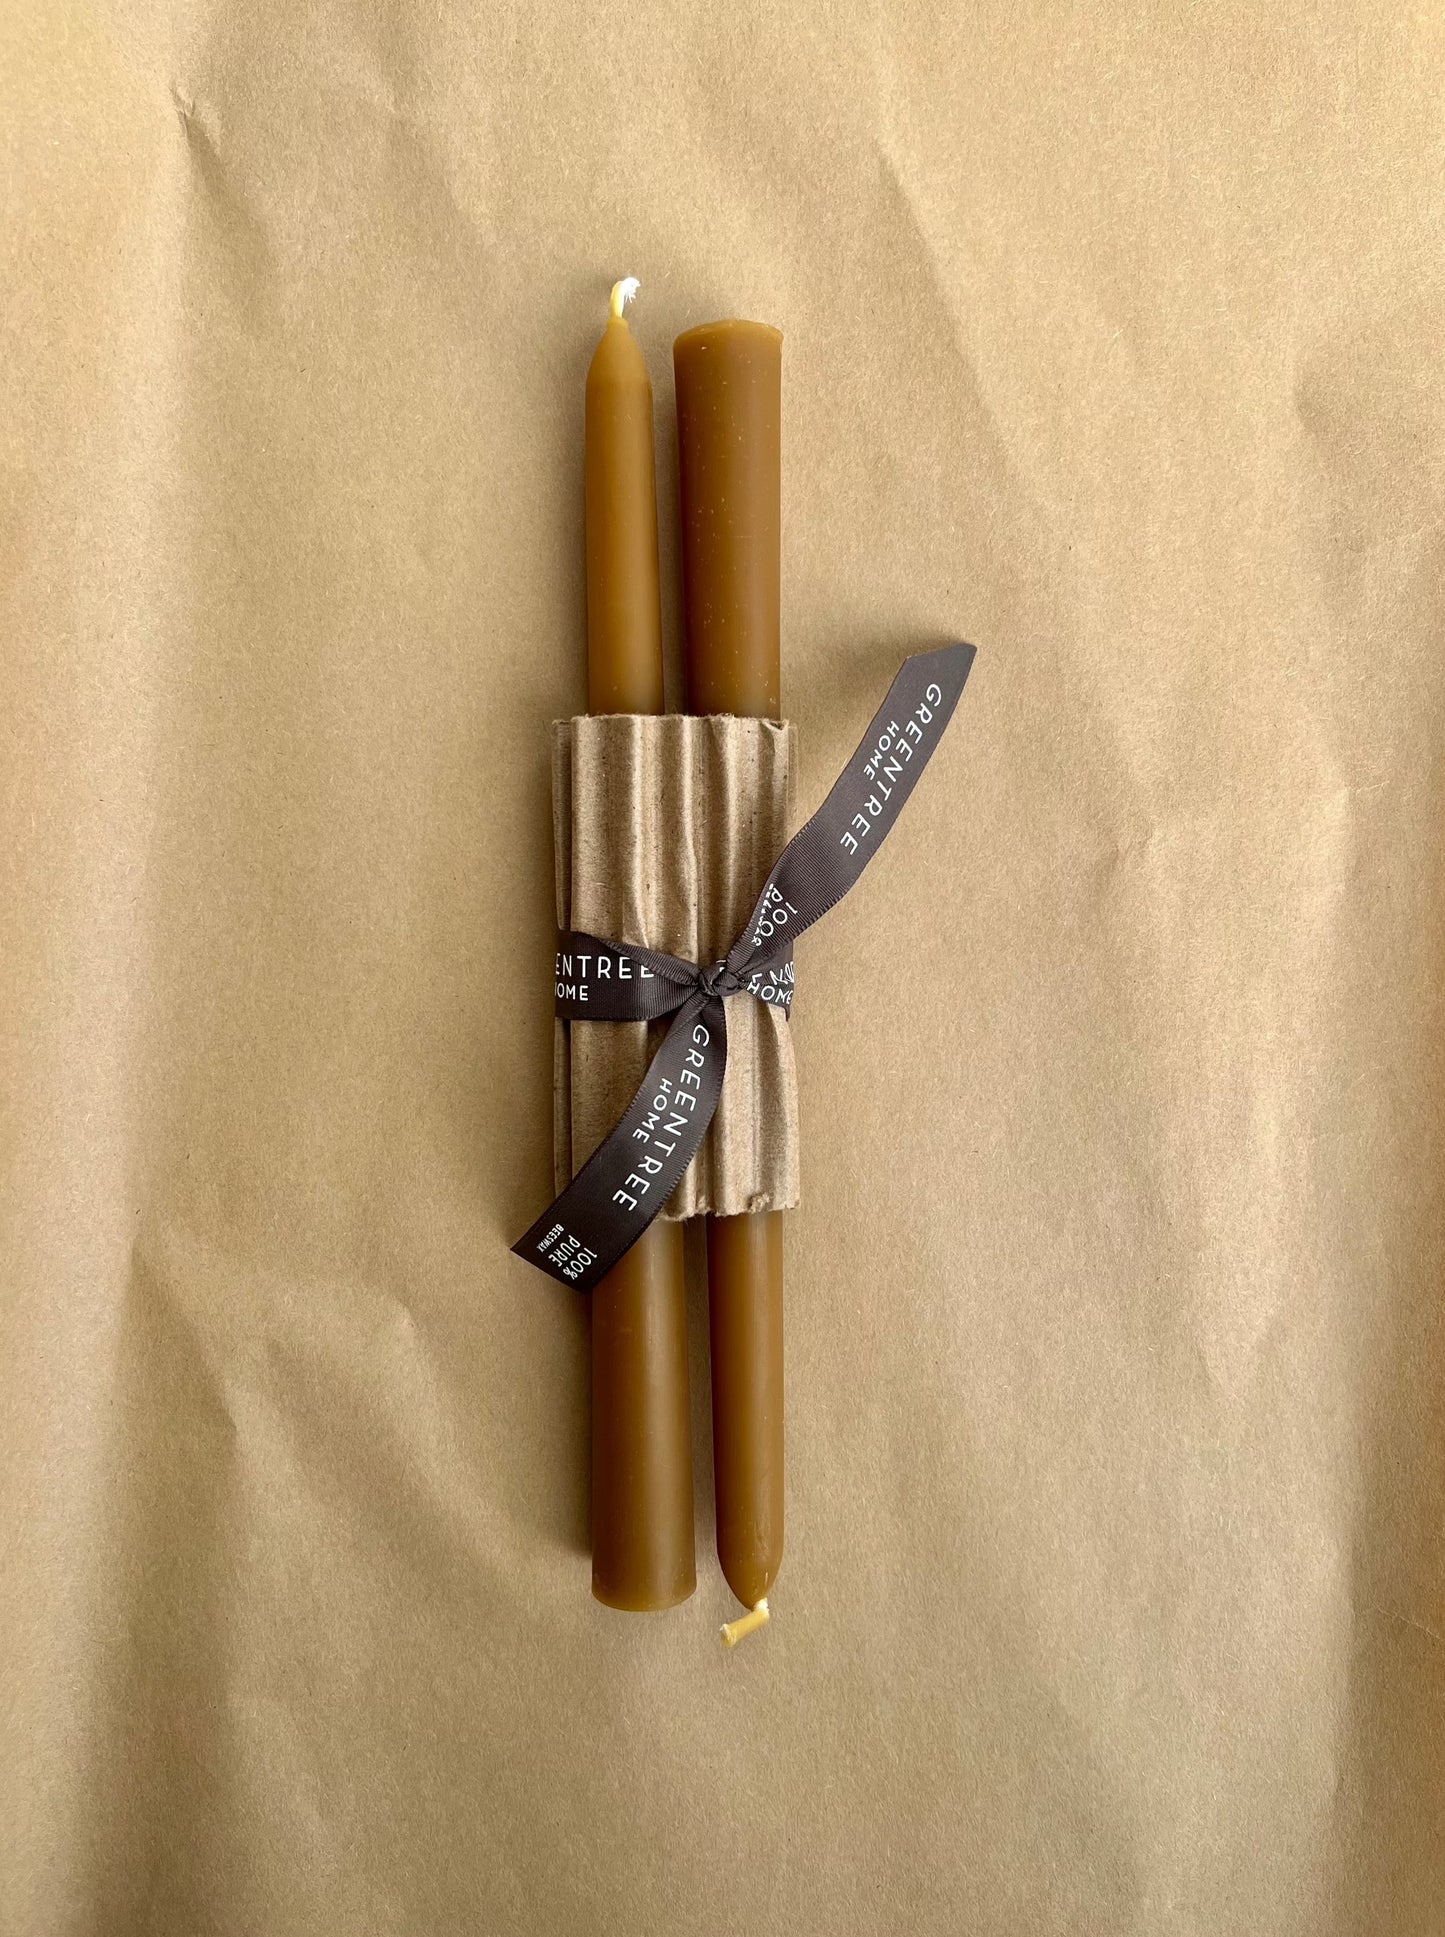 Everyday Tapers are "classic" candles. What makes a classic a classic? Beautiful anytime and anywhere – simple, meaningful, and perfect for every kind of occasion.  Set of 2, 100% pure North American beeswax candles. Each candle is hand poured and individually finished in New York State. burnt amber